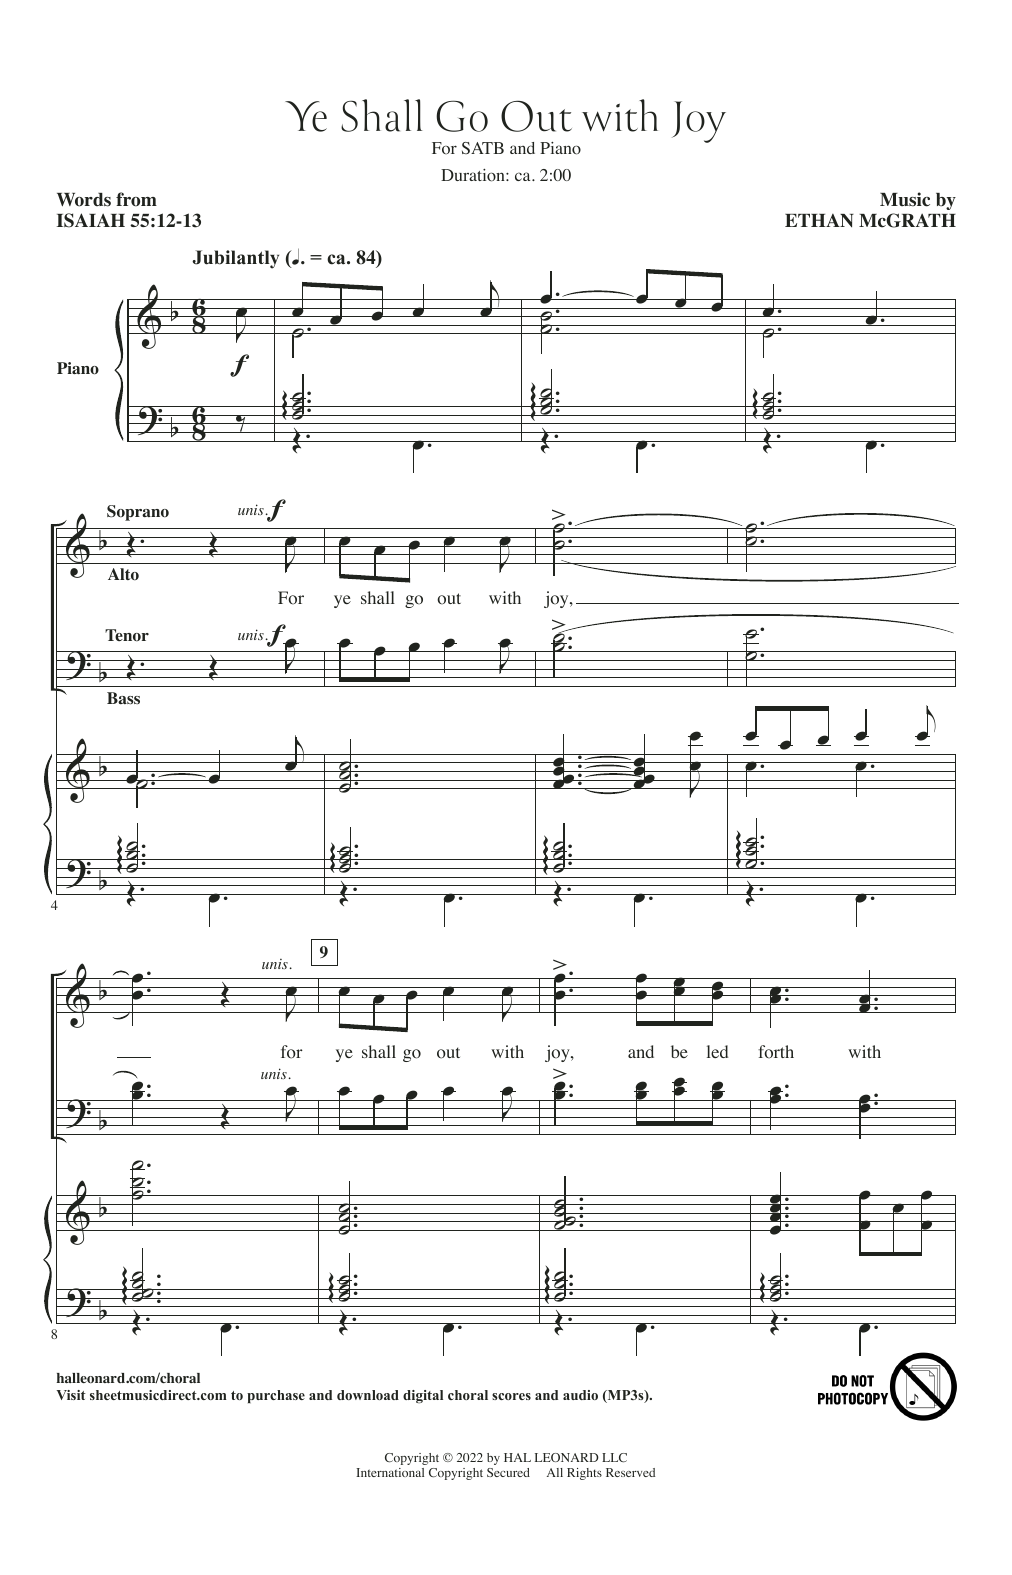 Download Ethan McGrath Ye Shall Go Out With Joy Sheet Music